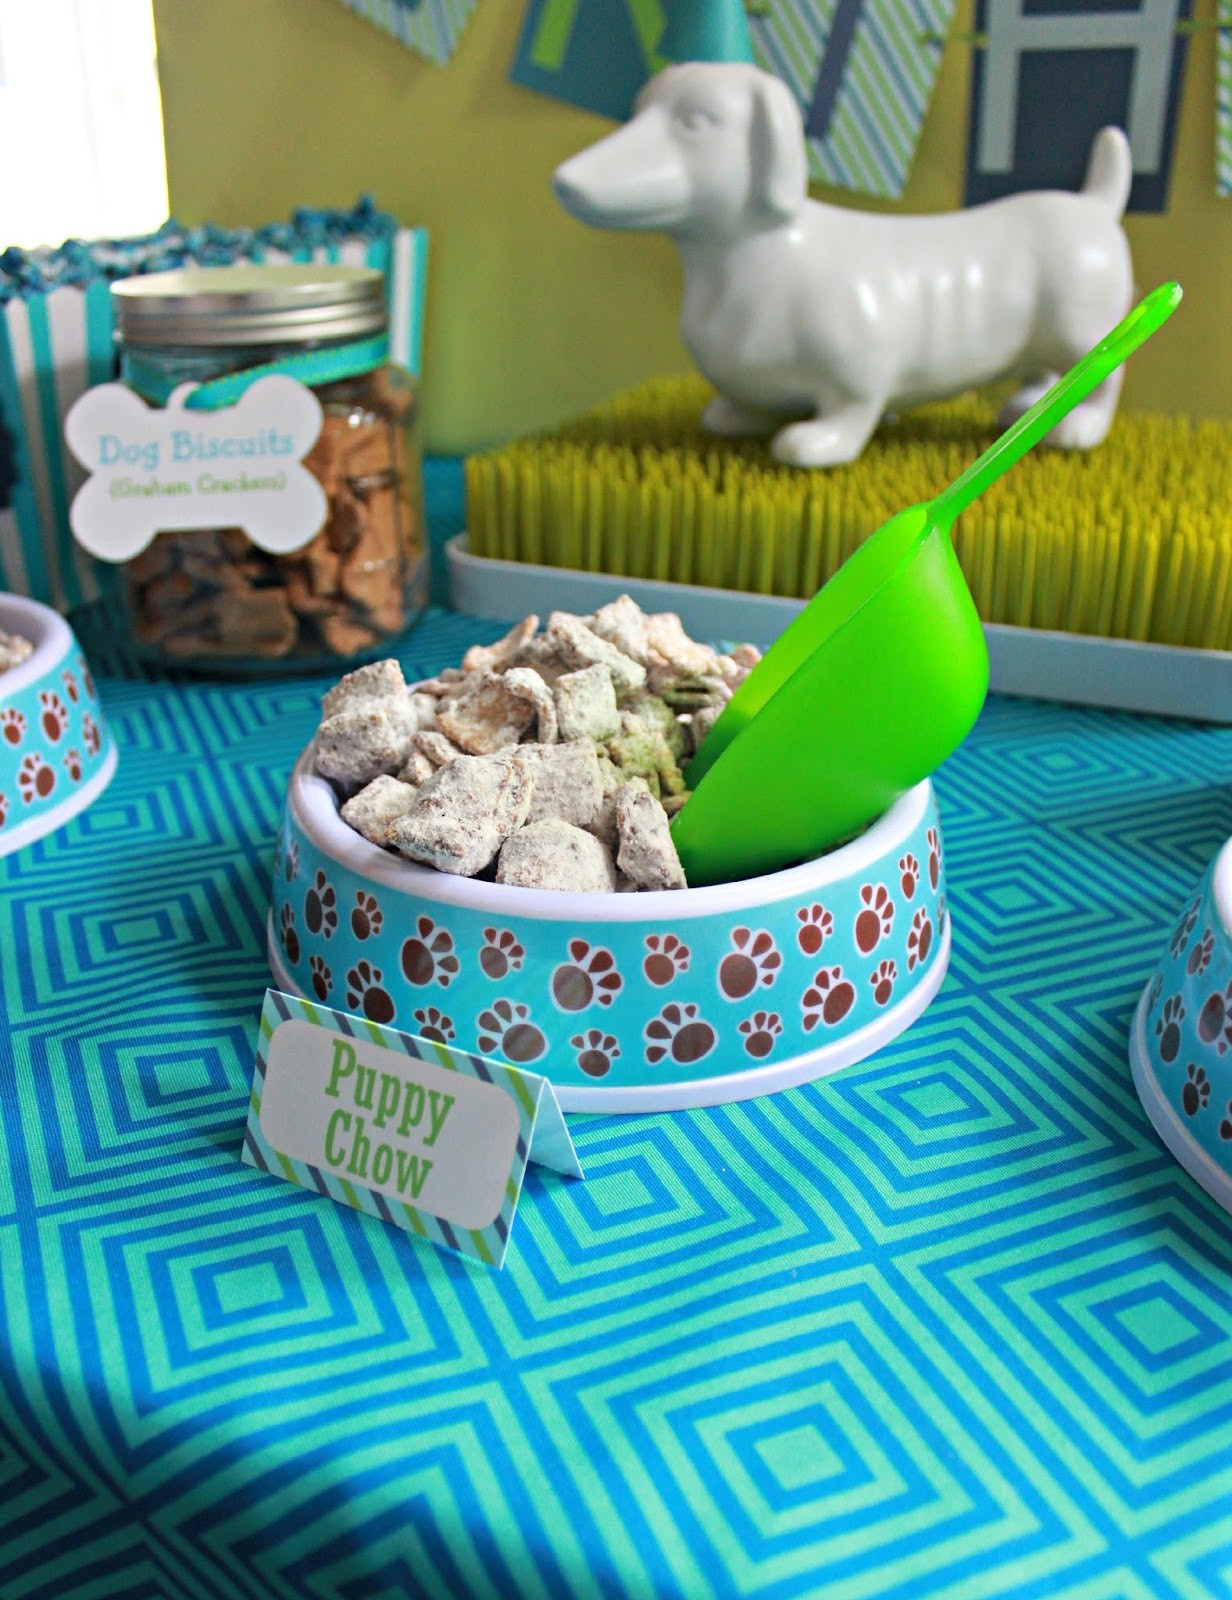 Dog Birthday Party Ideas
 It s a Pawty Puppy Party First Birthday Part 1